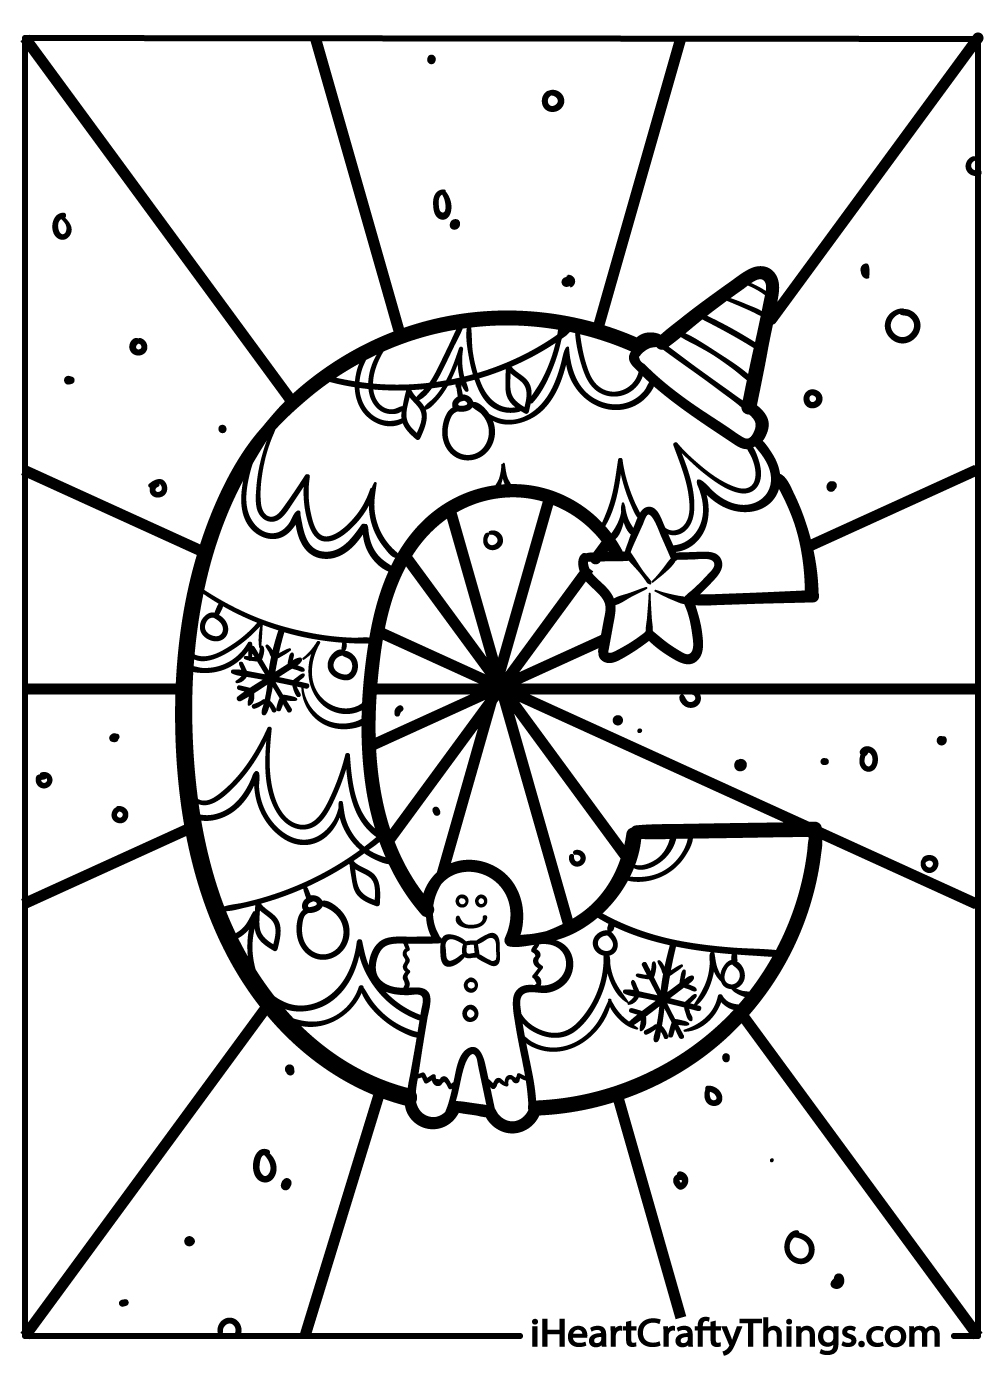 capital letter c coloring printable